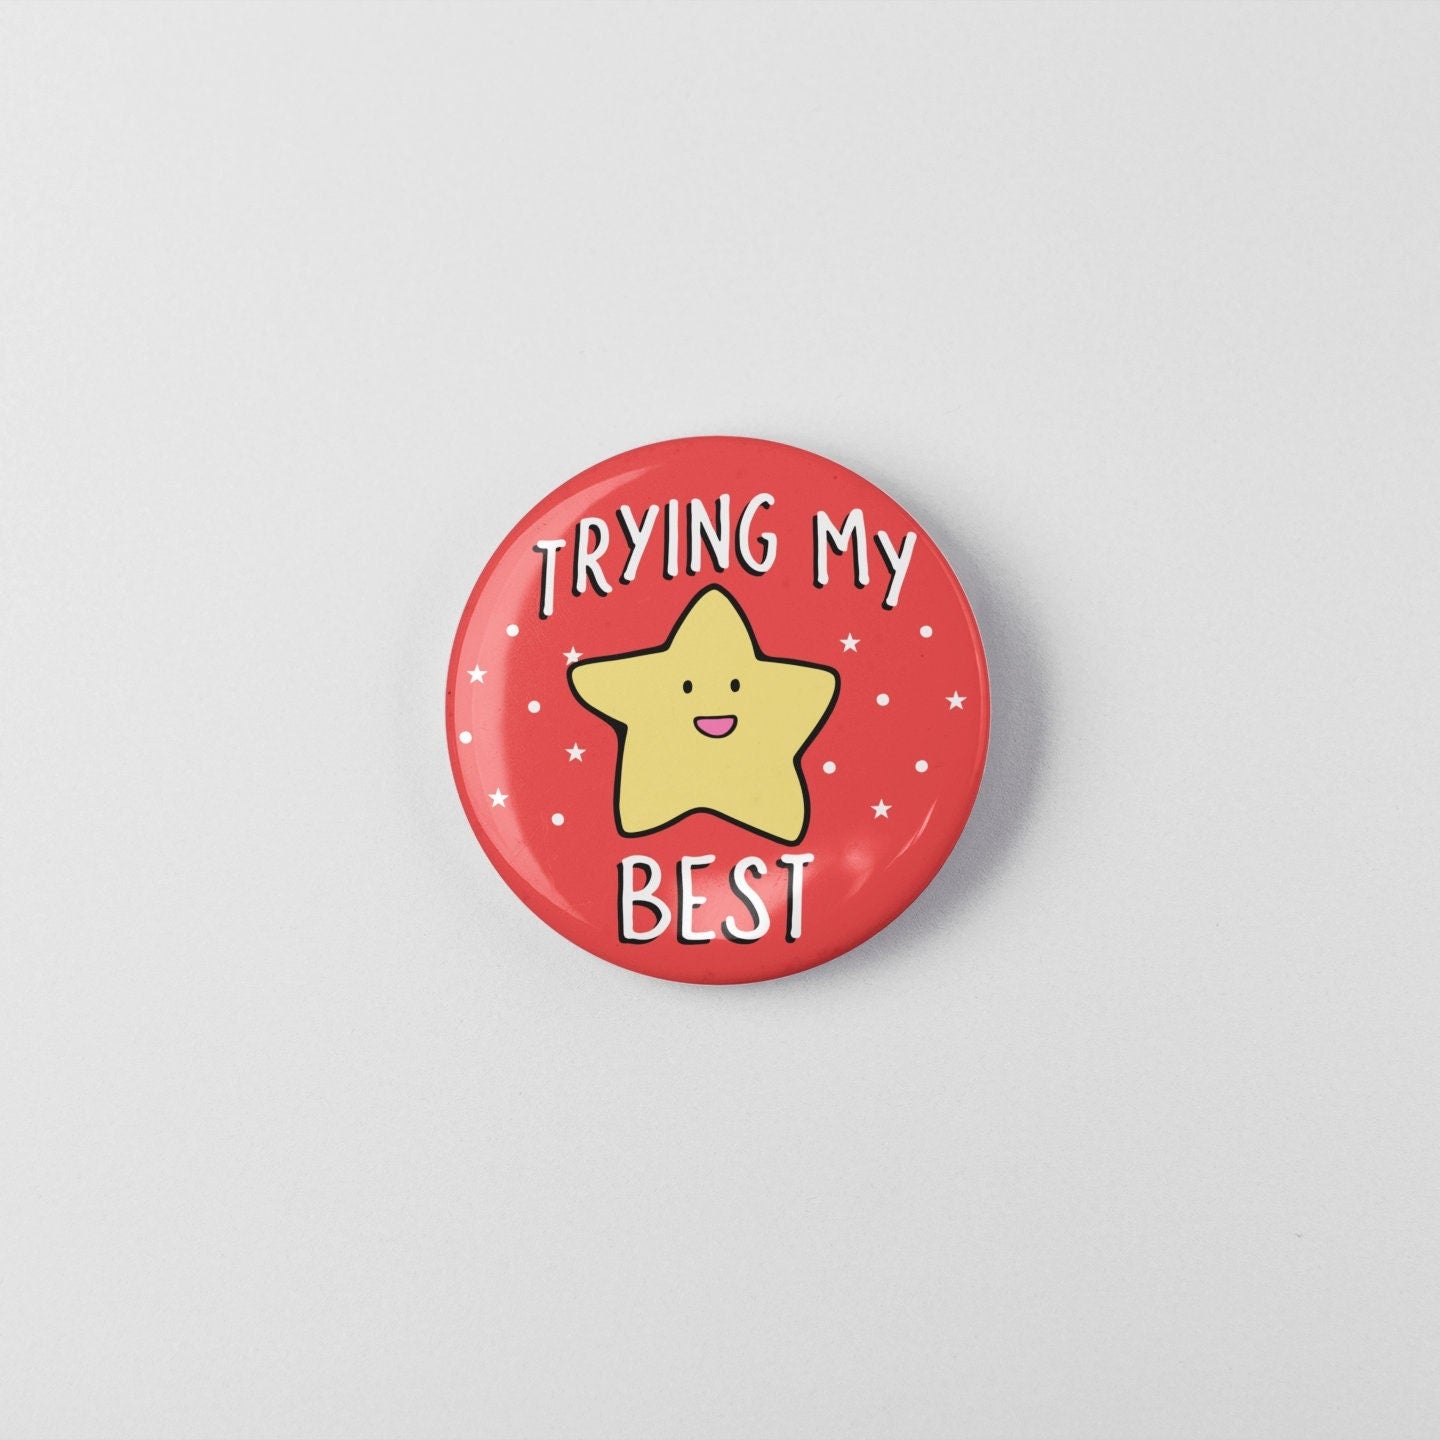 Trying My Best - Pin Badge | Positive Pins, Mental Health Gift, Motivational Gifts